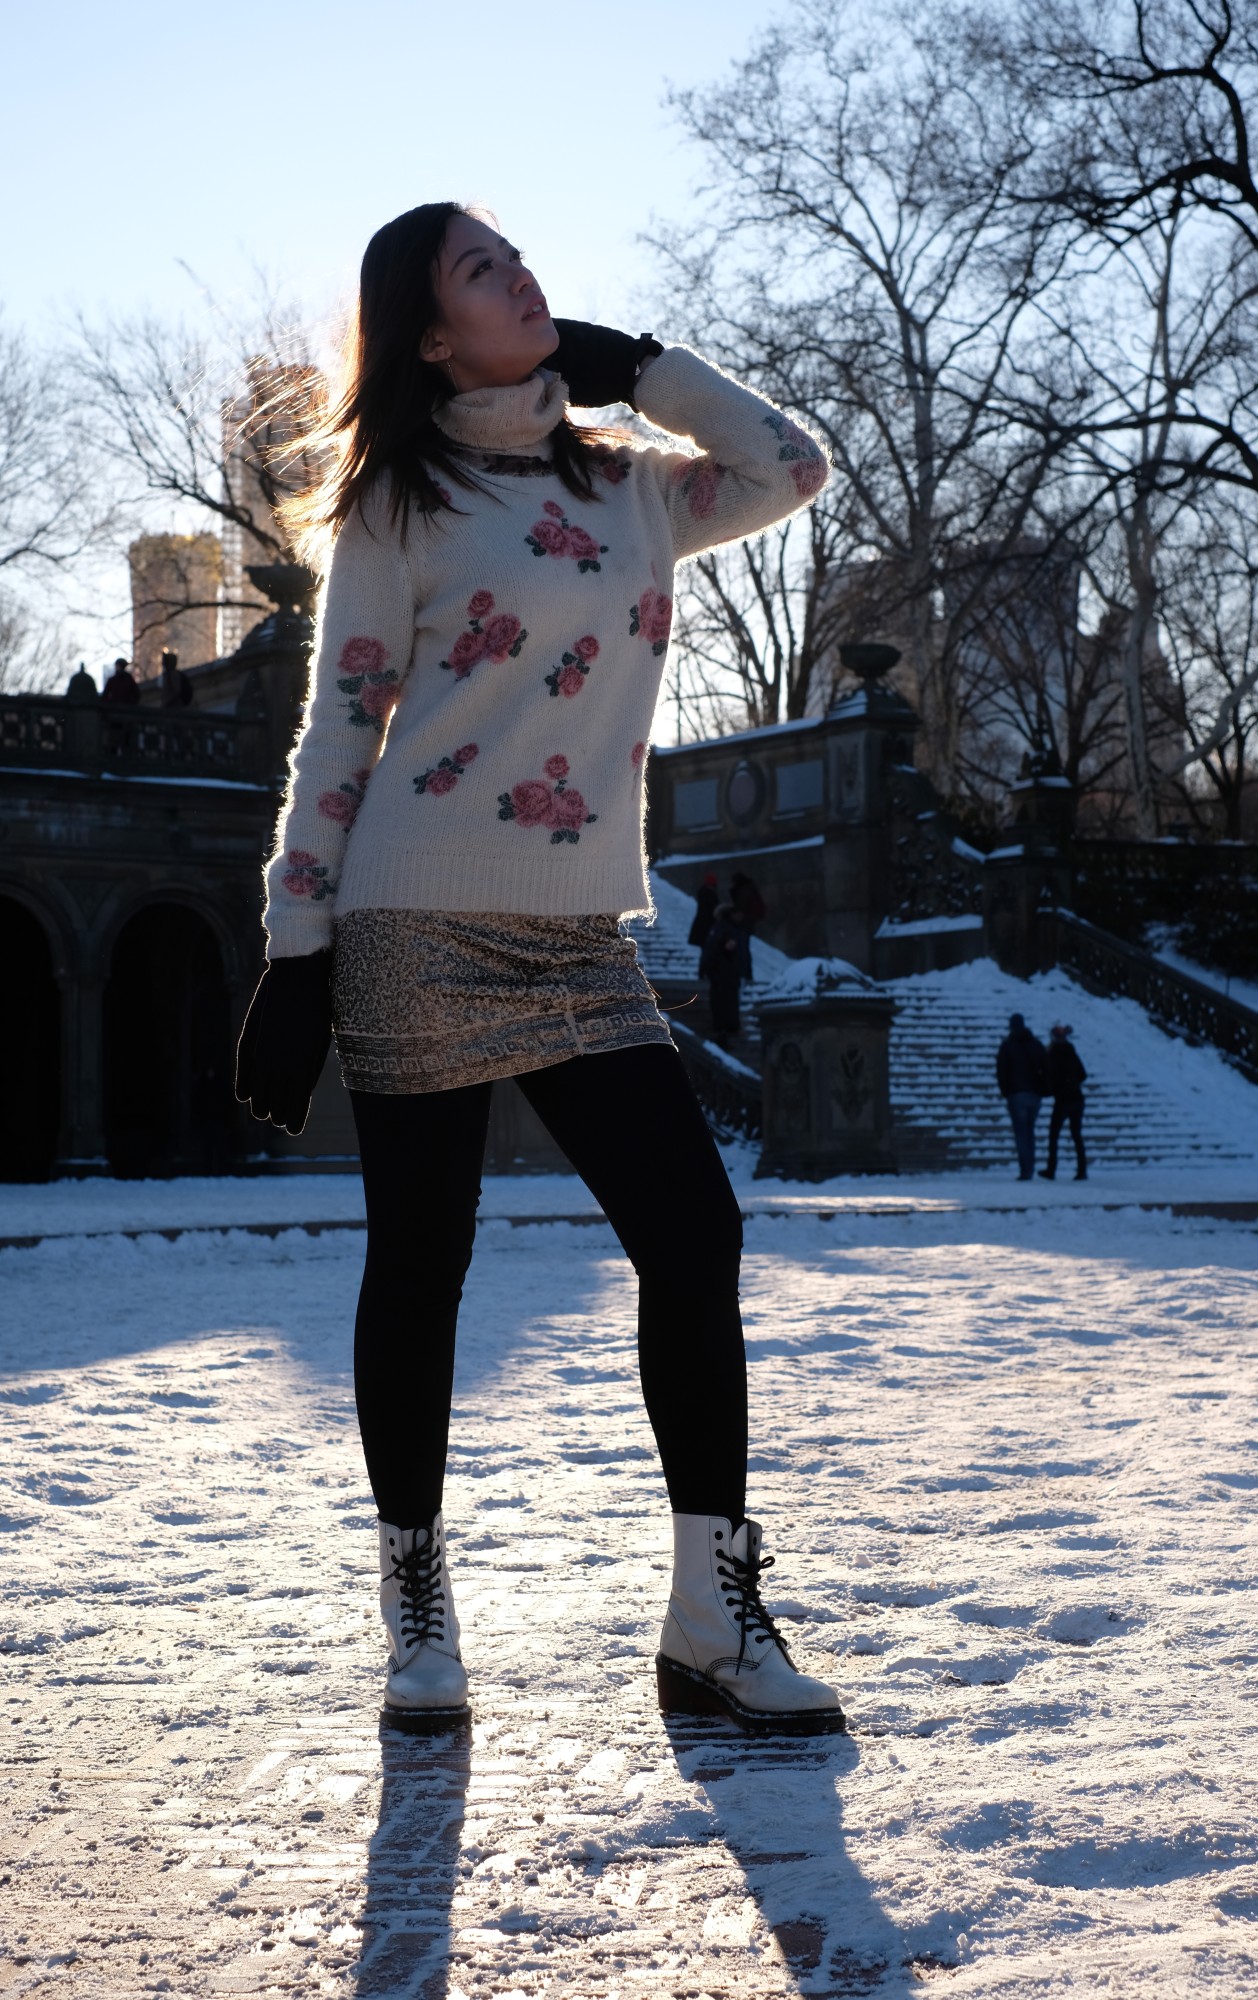 chinese girl in central park